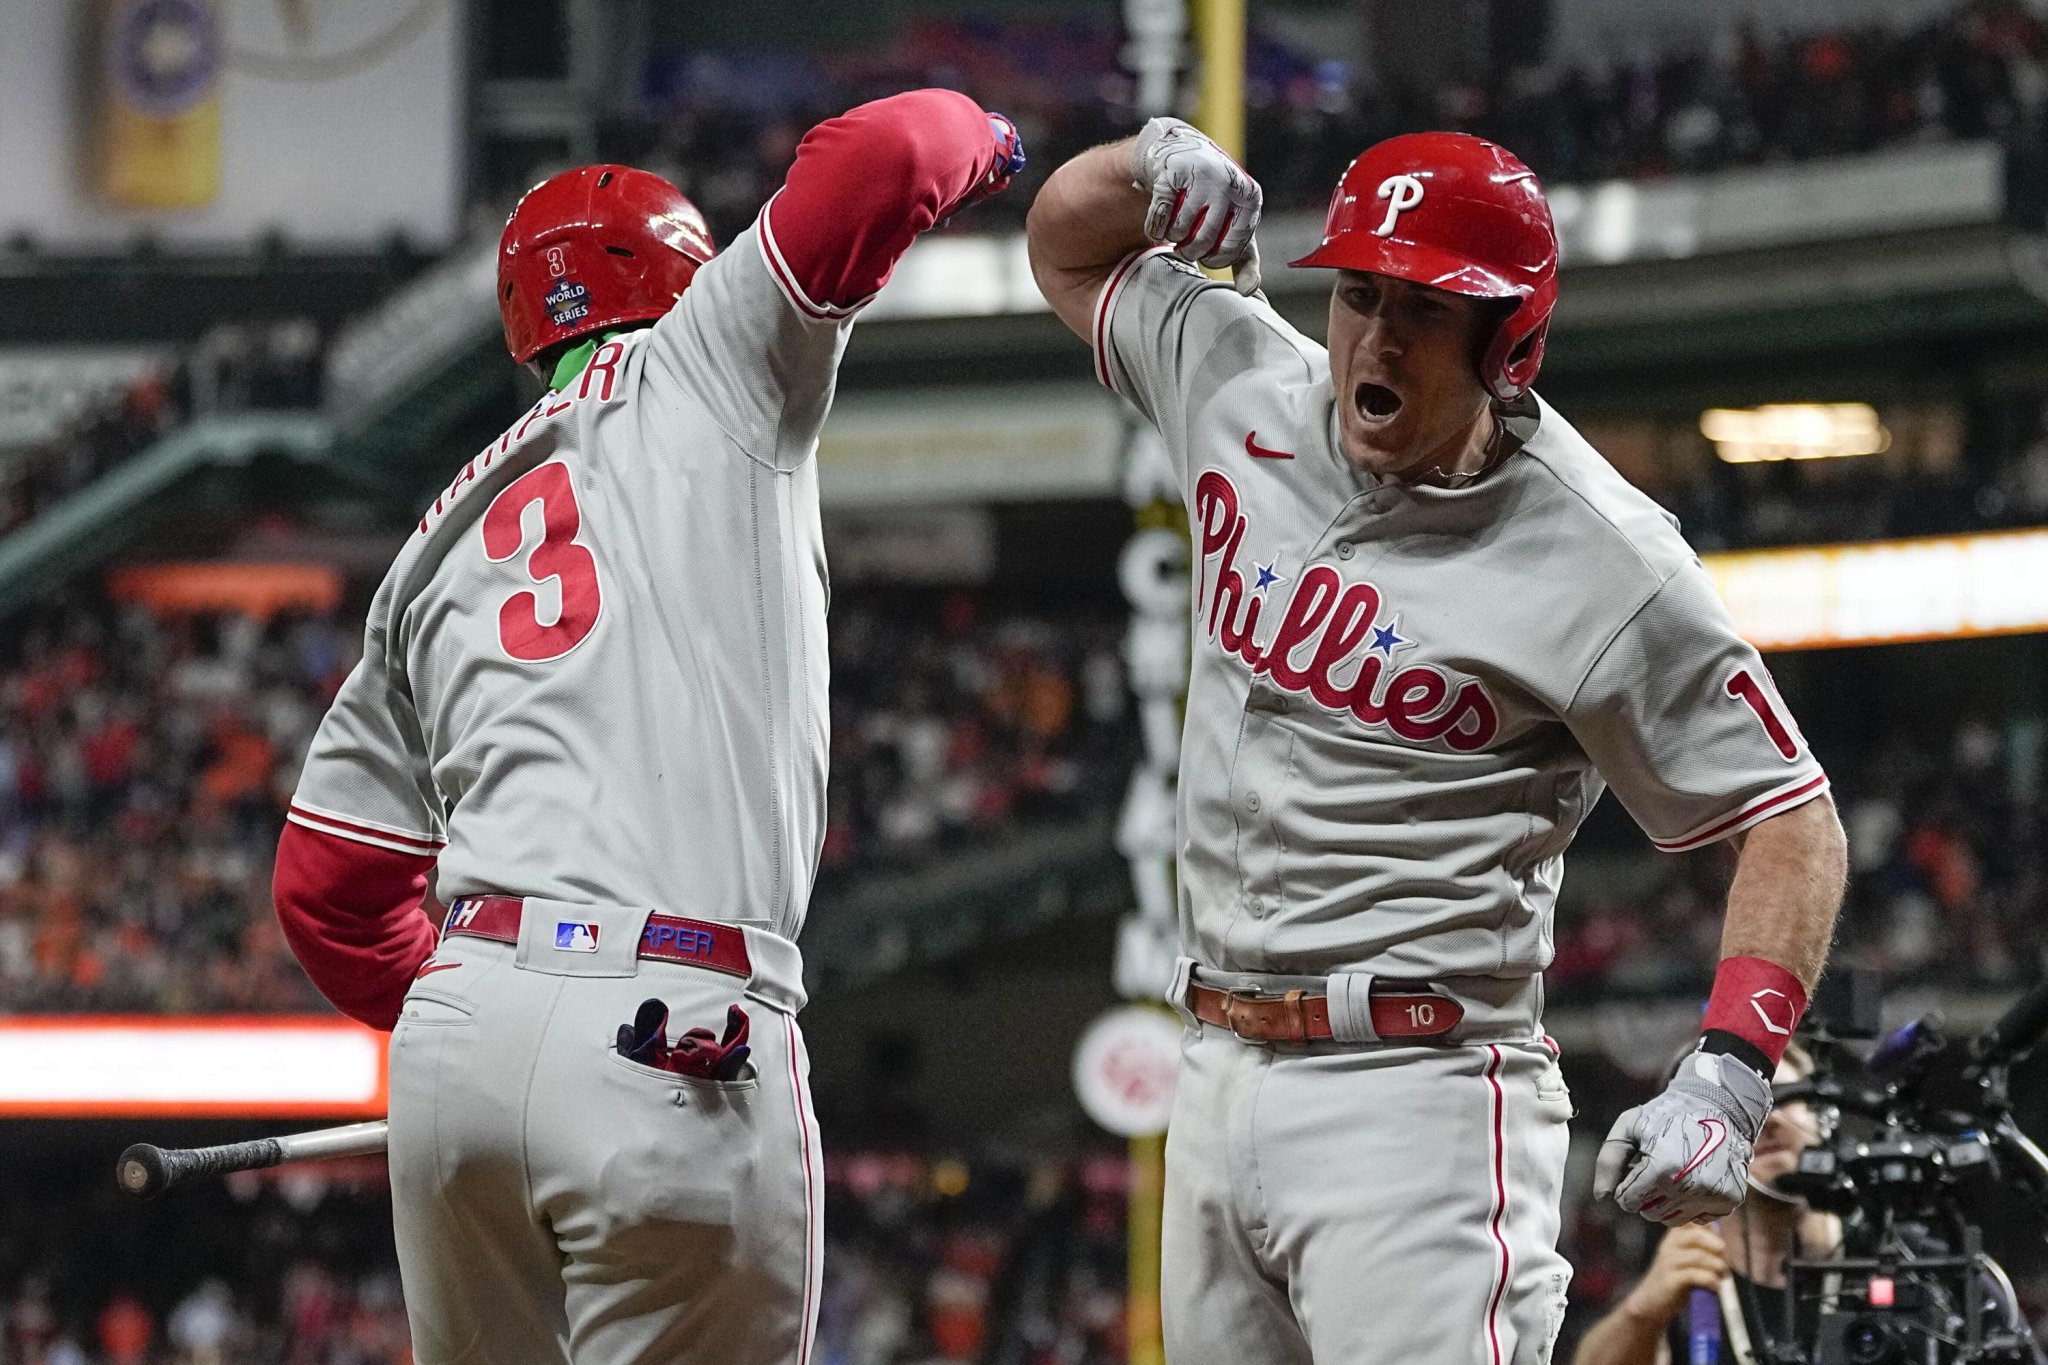 World Series: How the Phillies Rallied to Steal Game 1 in Houston